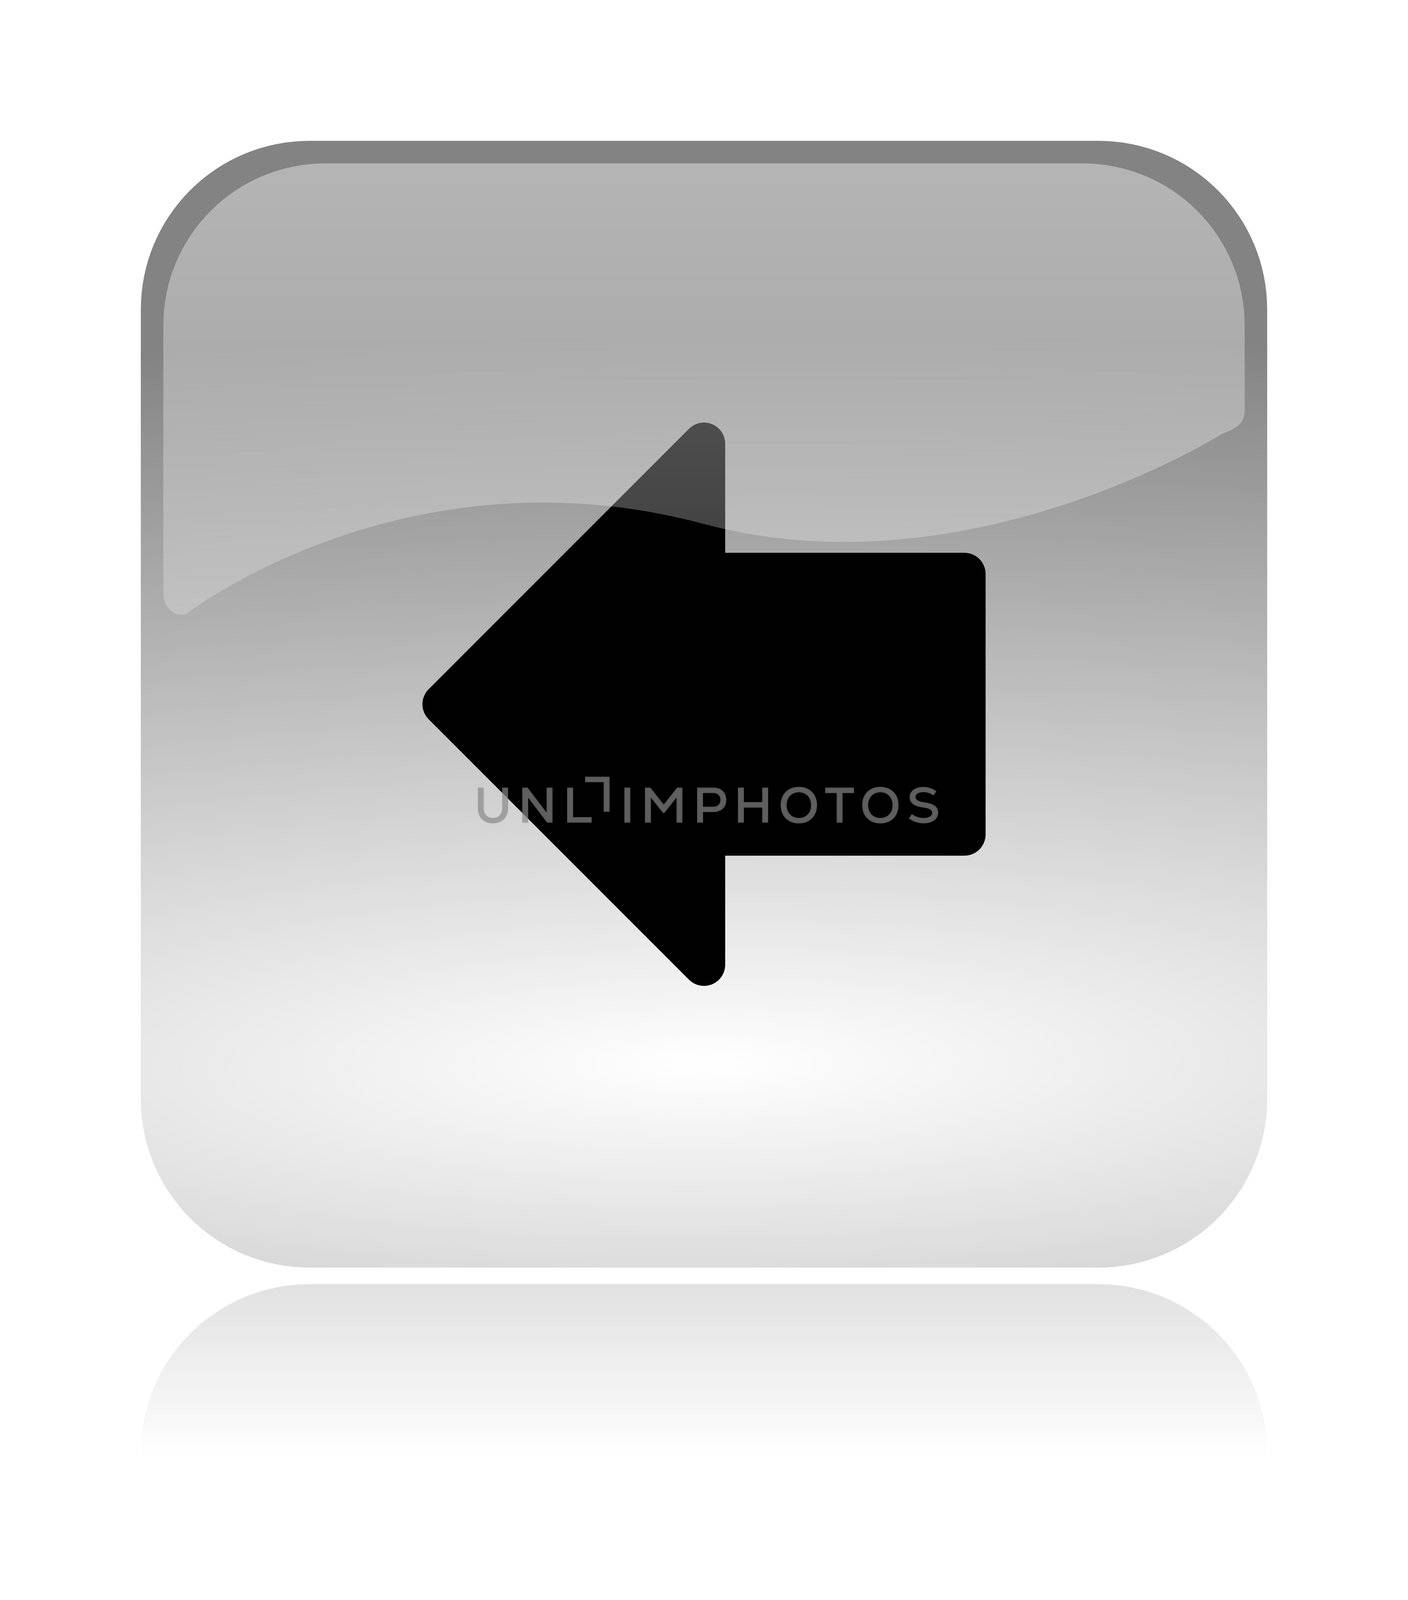 Left arrow previous, white, transparent and glossy web interface icon with reflection